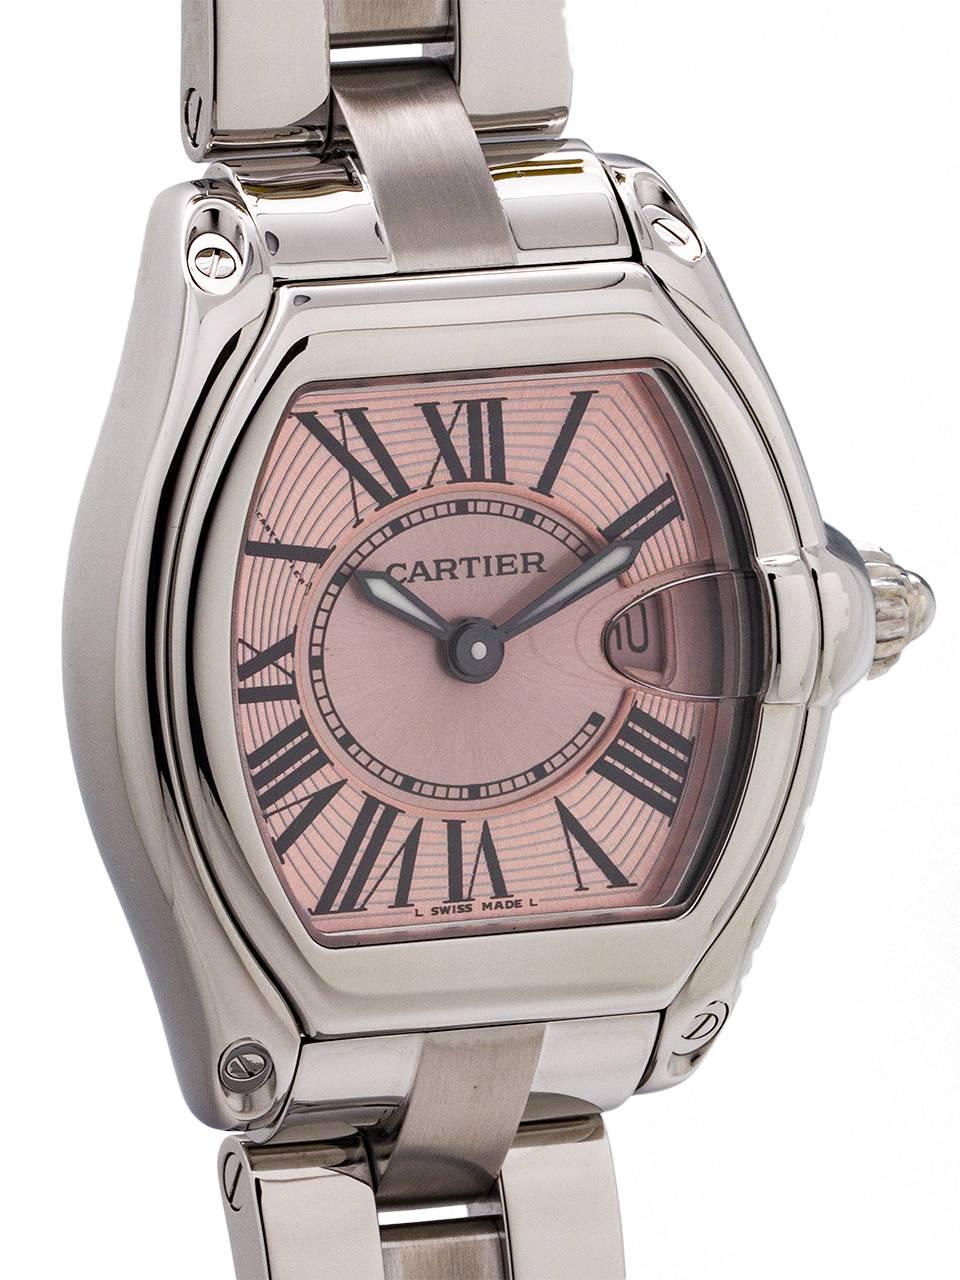 
Cartier lady Roadster Breast Cancer limited edition circa 2008. Featuring 31 x 37mm tonneau shaped case with sapphire crystal and date at 3 o’clock. With classic stretch Roman figures dial, with 2 tone pink dial with inner breast cancer ribbon